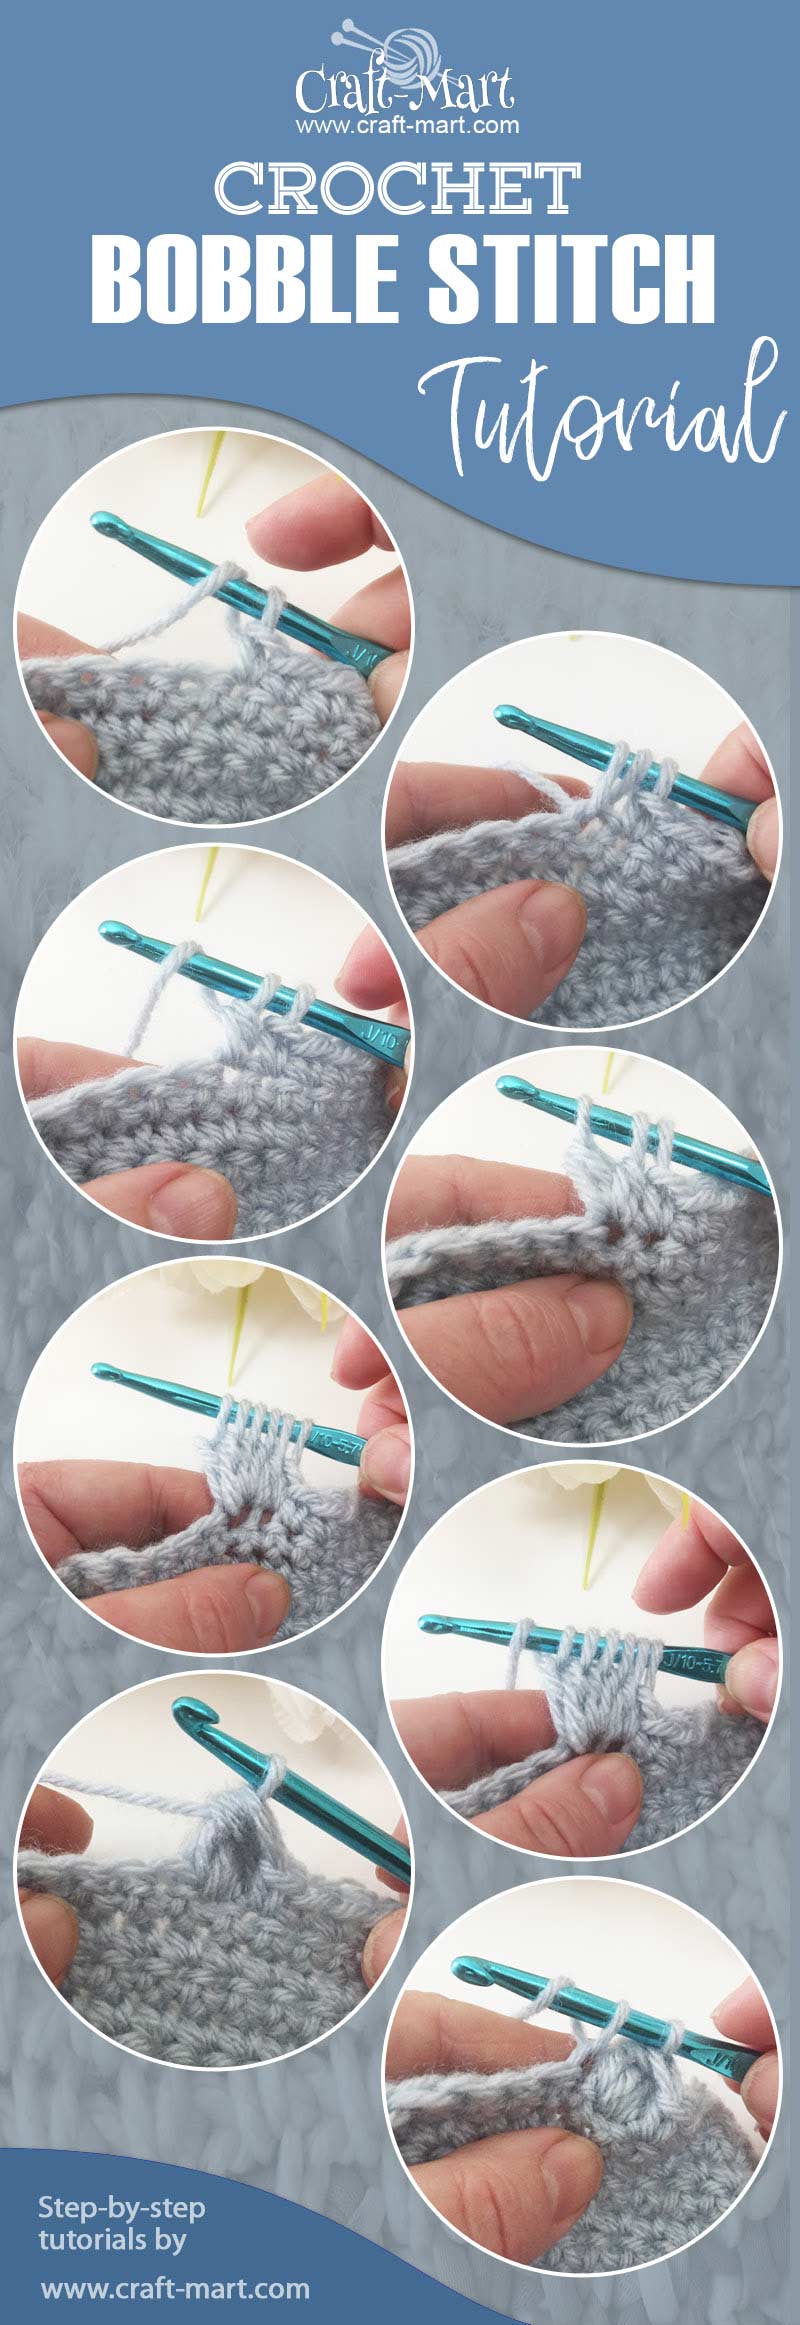 how to crochet Bobble Stitch - bobble stitch blanket step-by-step tutorial by craft-mart